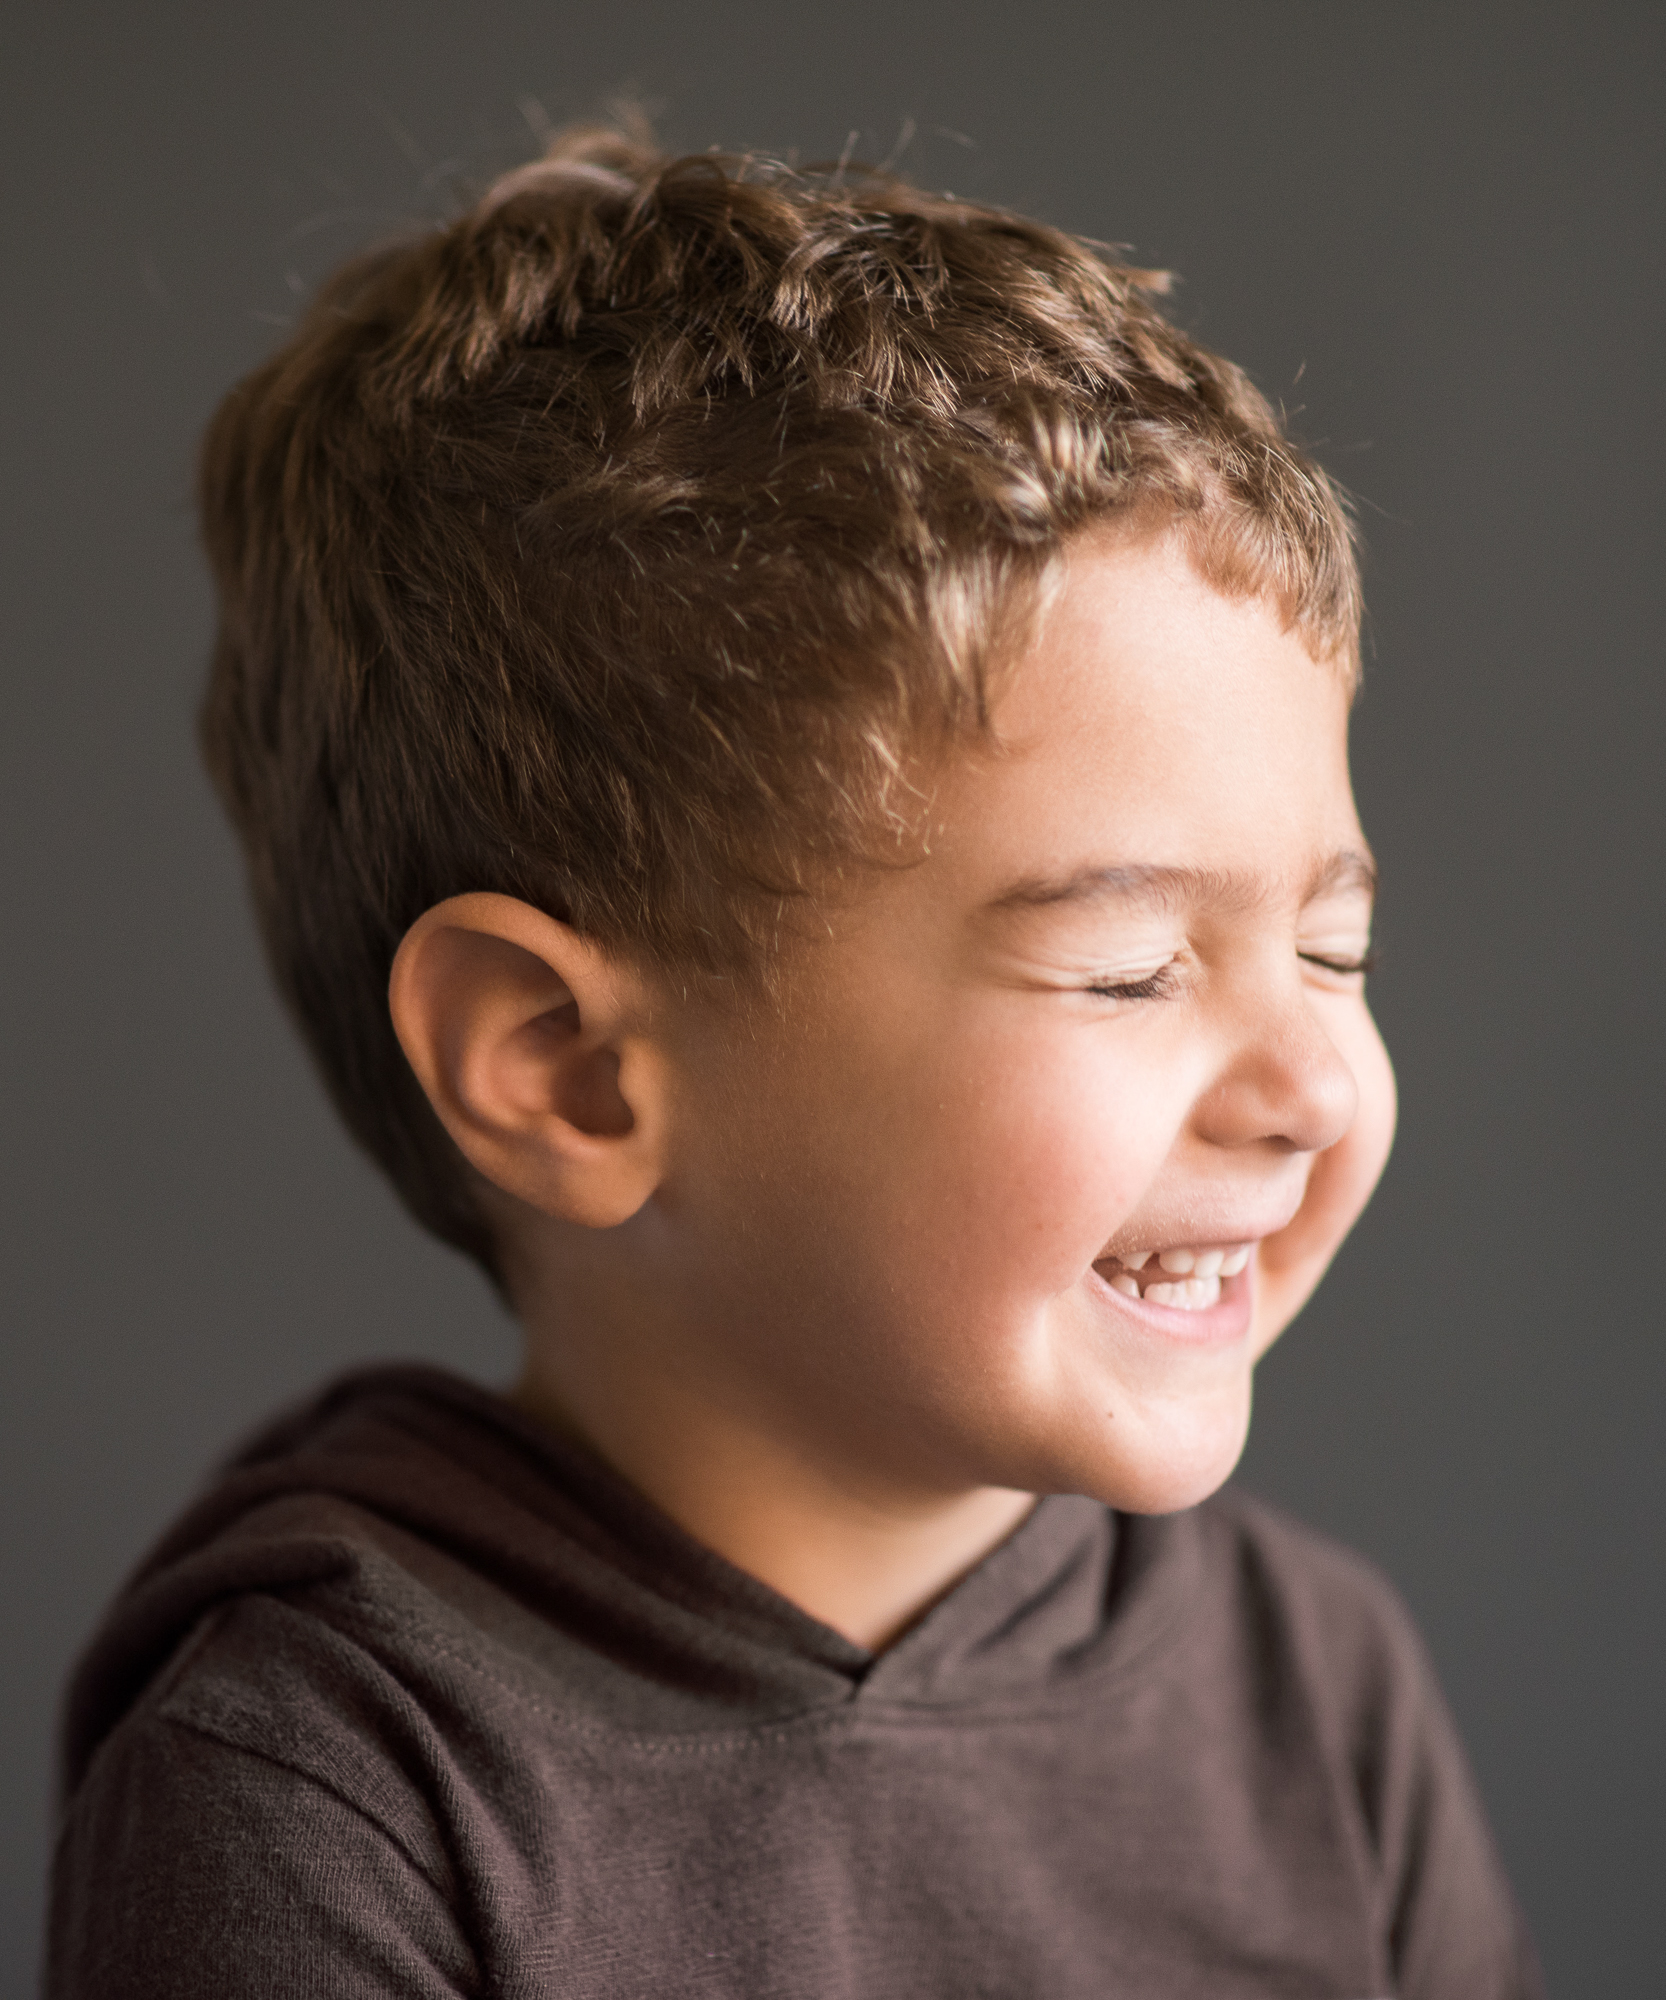 small boy laughing with eyes closed in studio session